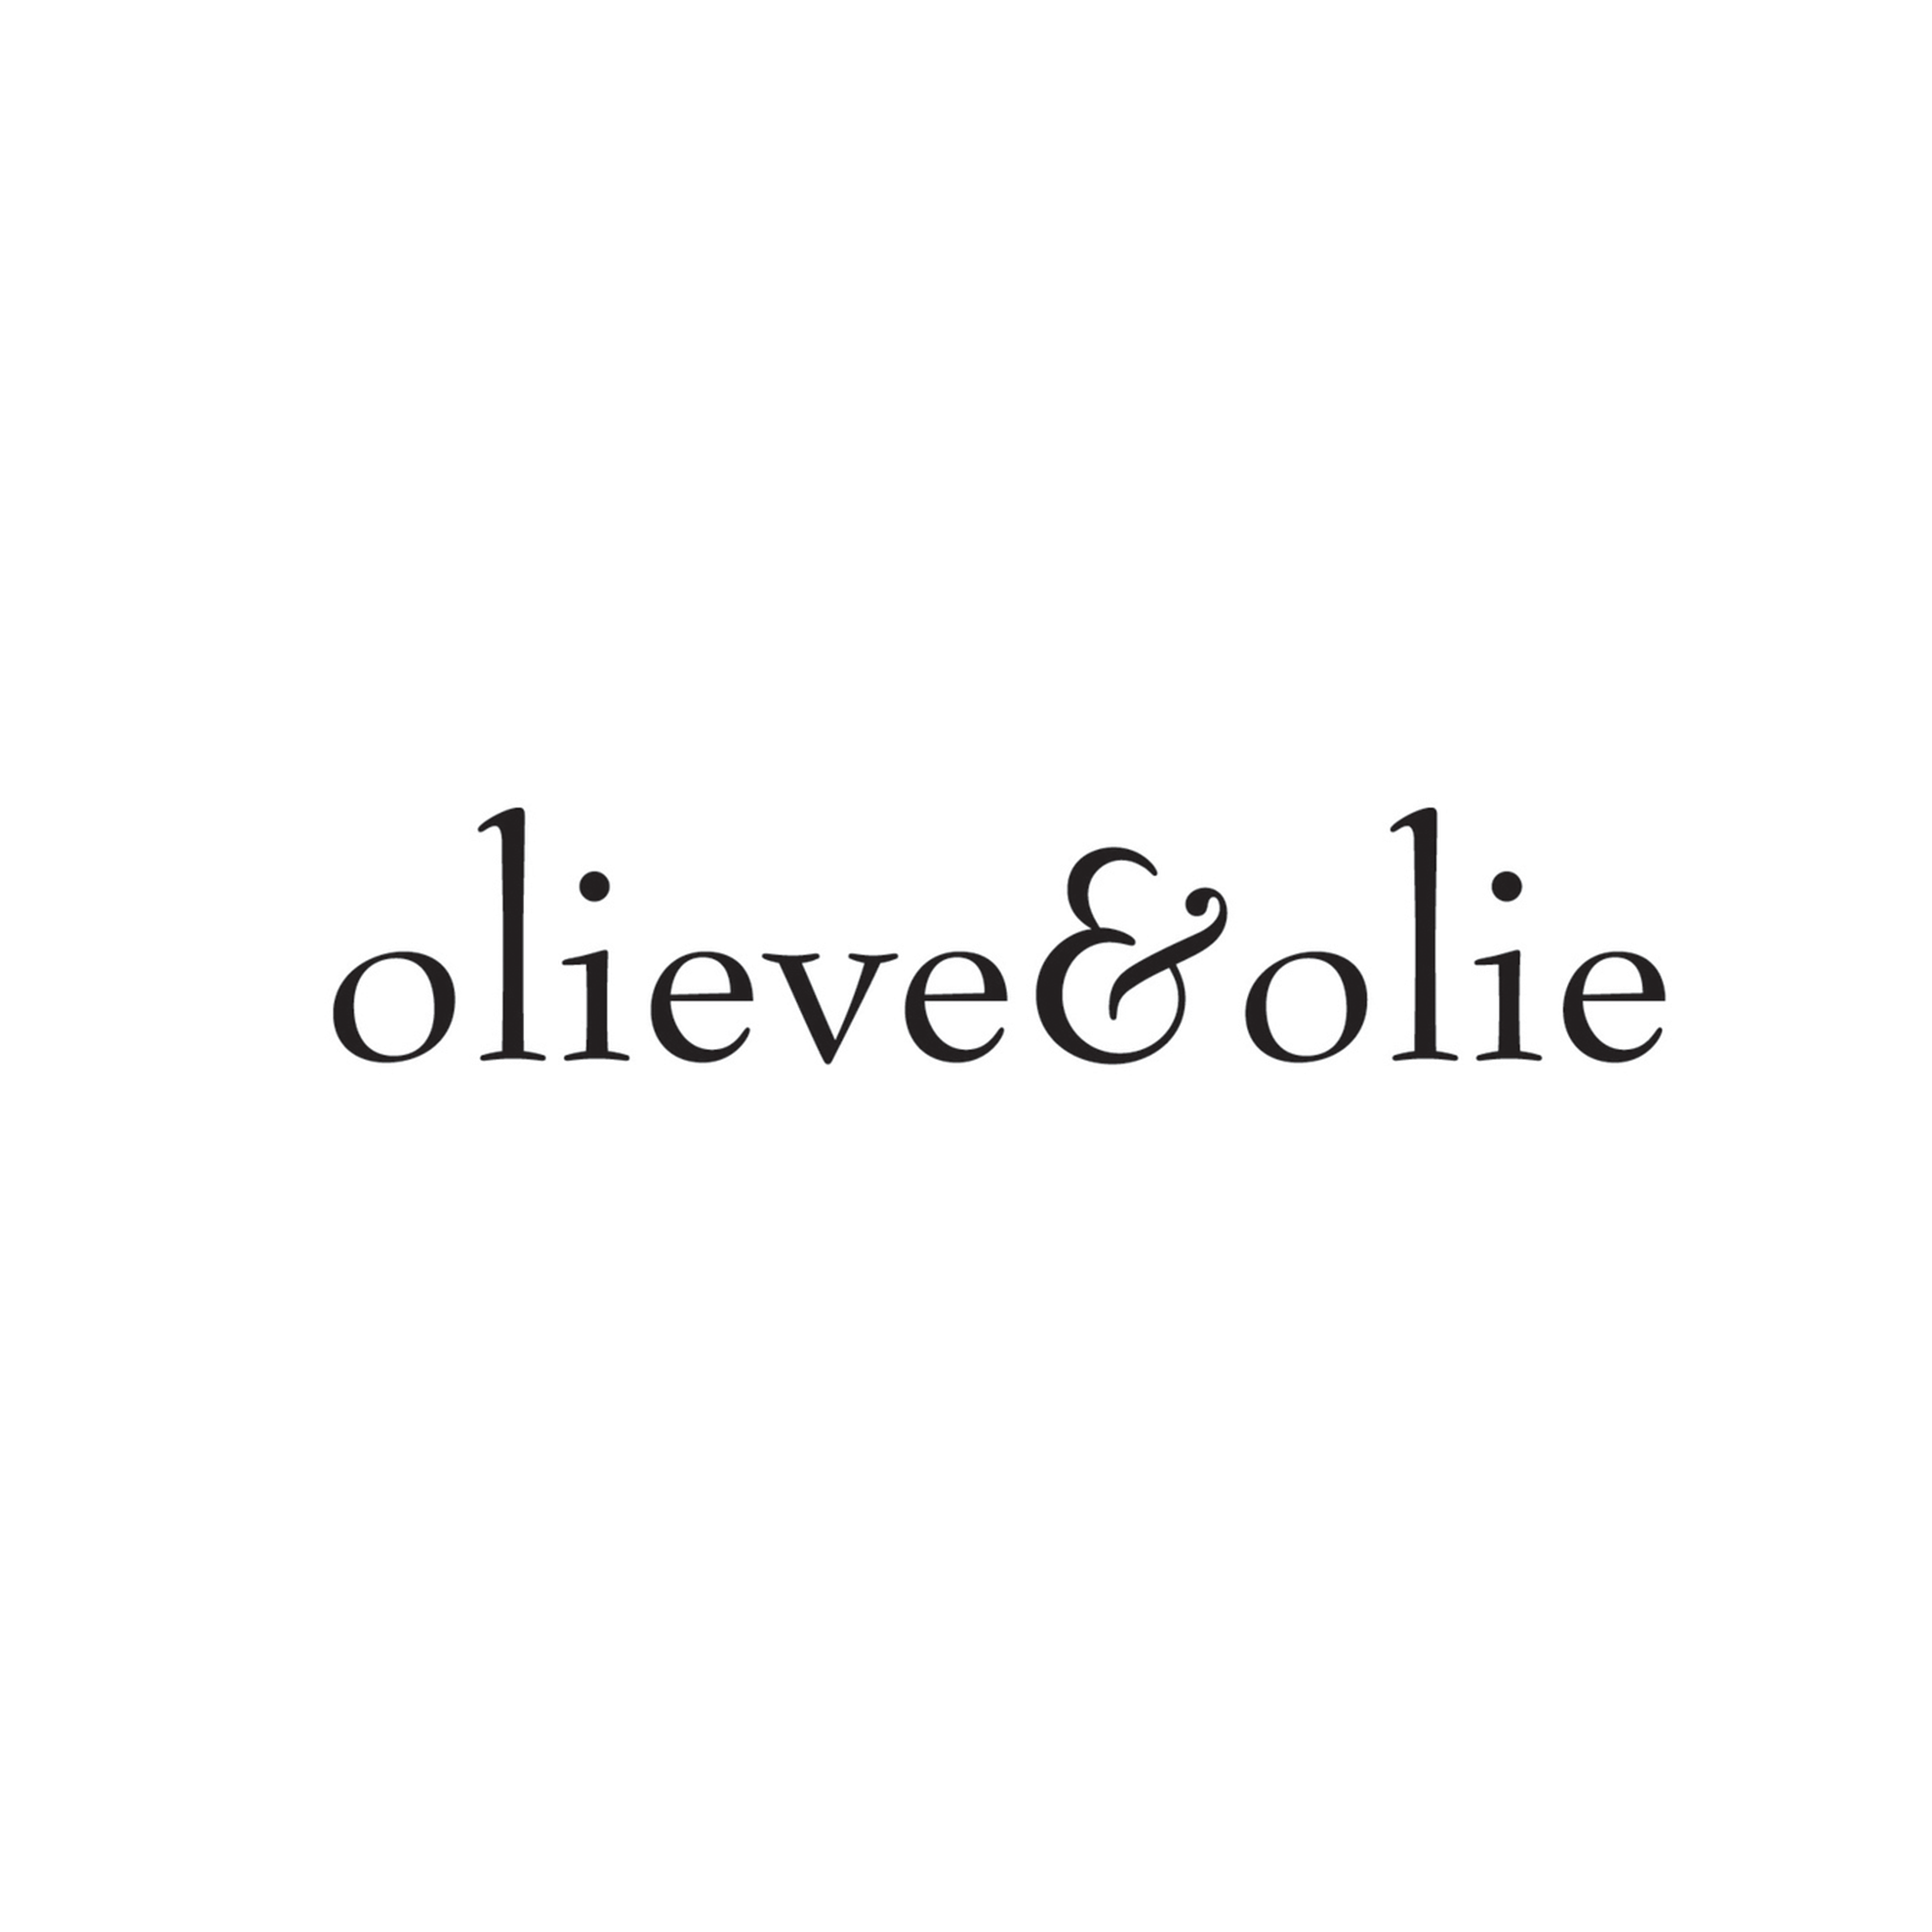 olieve.png